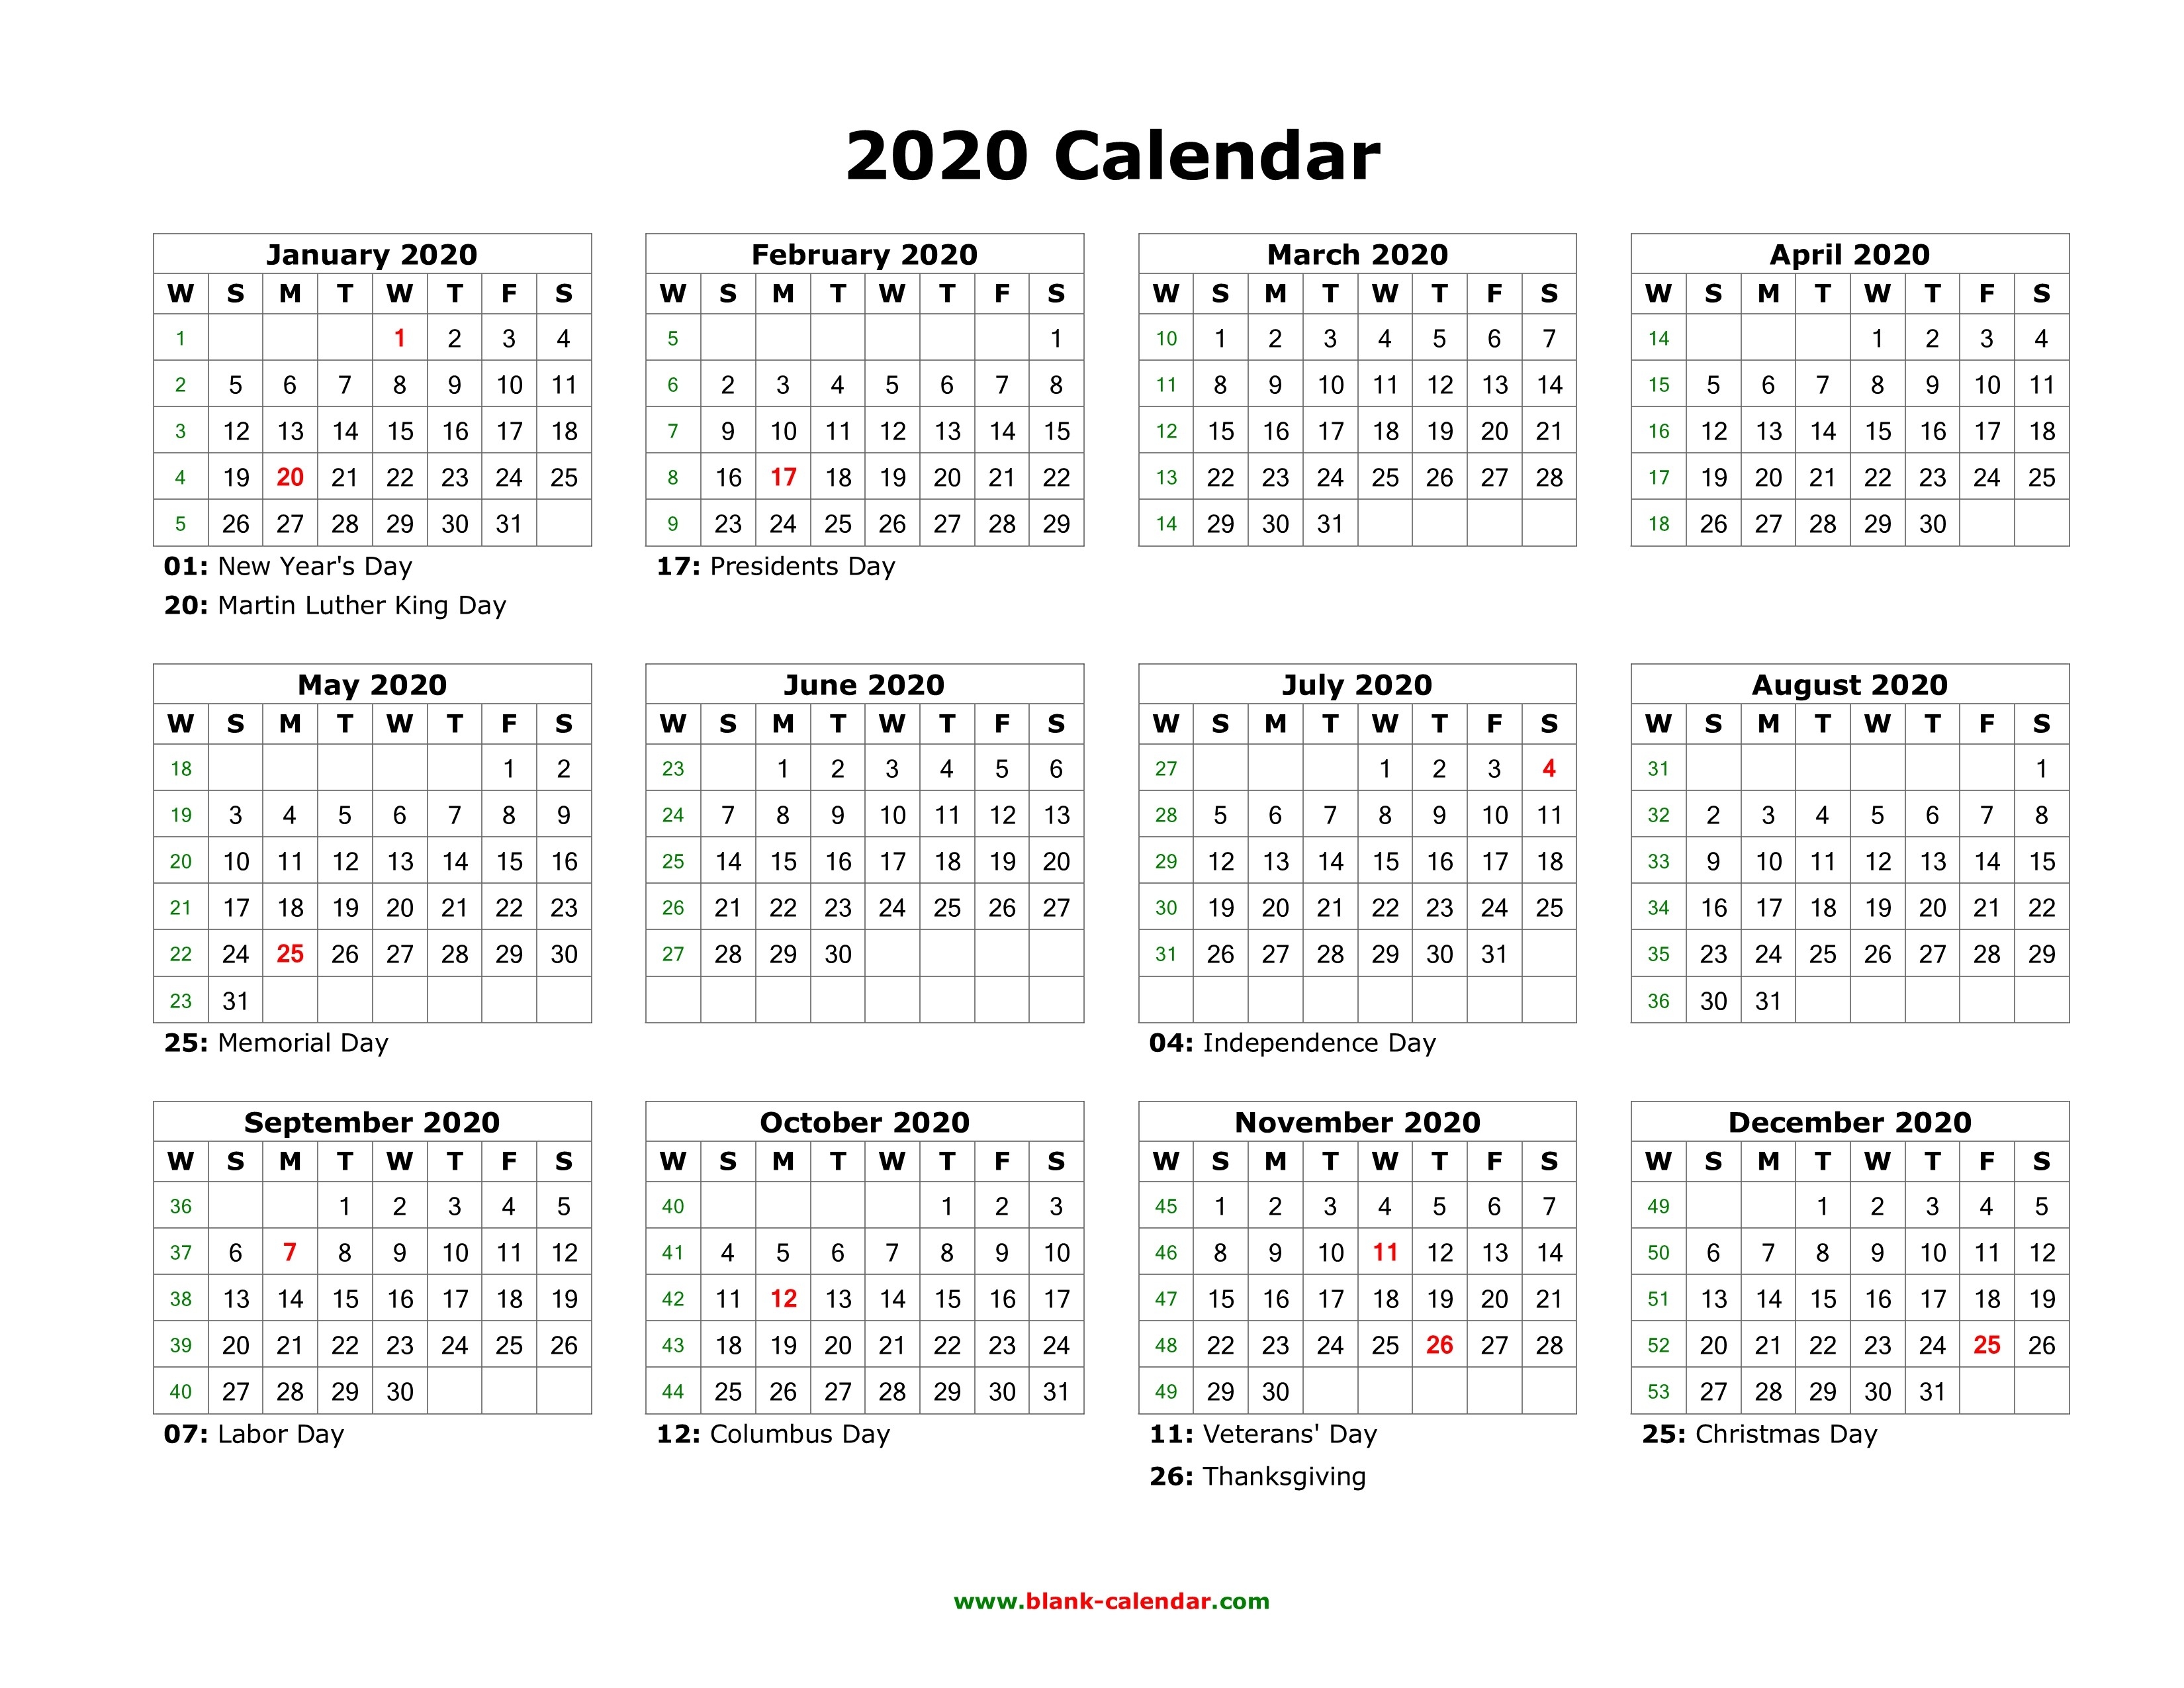 Download Blank Calendar 2020 With Us Holidays (12 Months On-Calendar 2020 Us Holidays